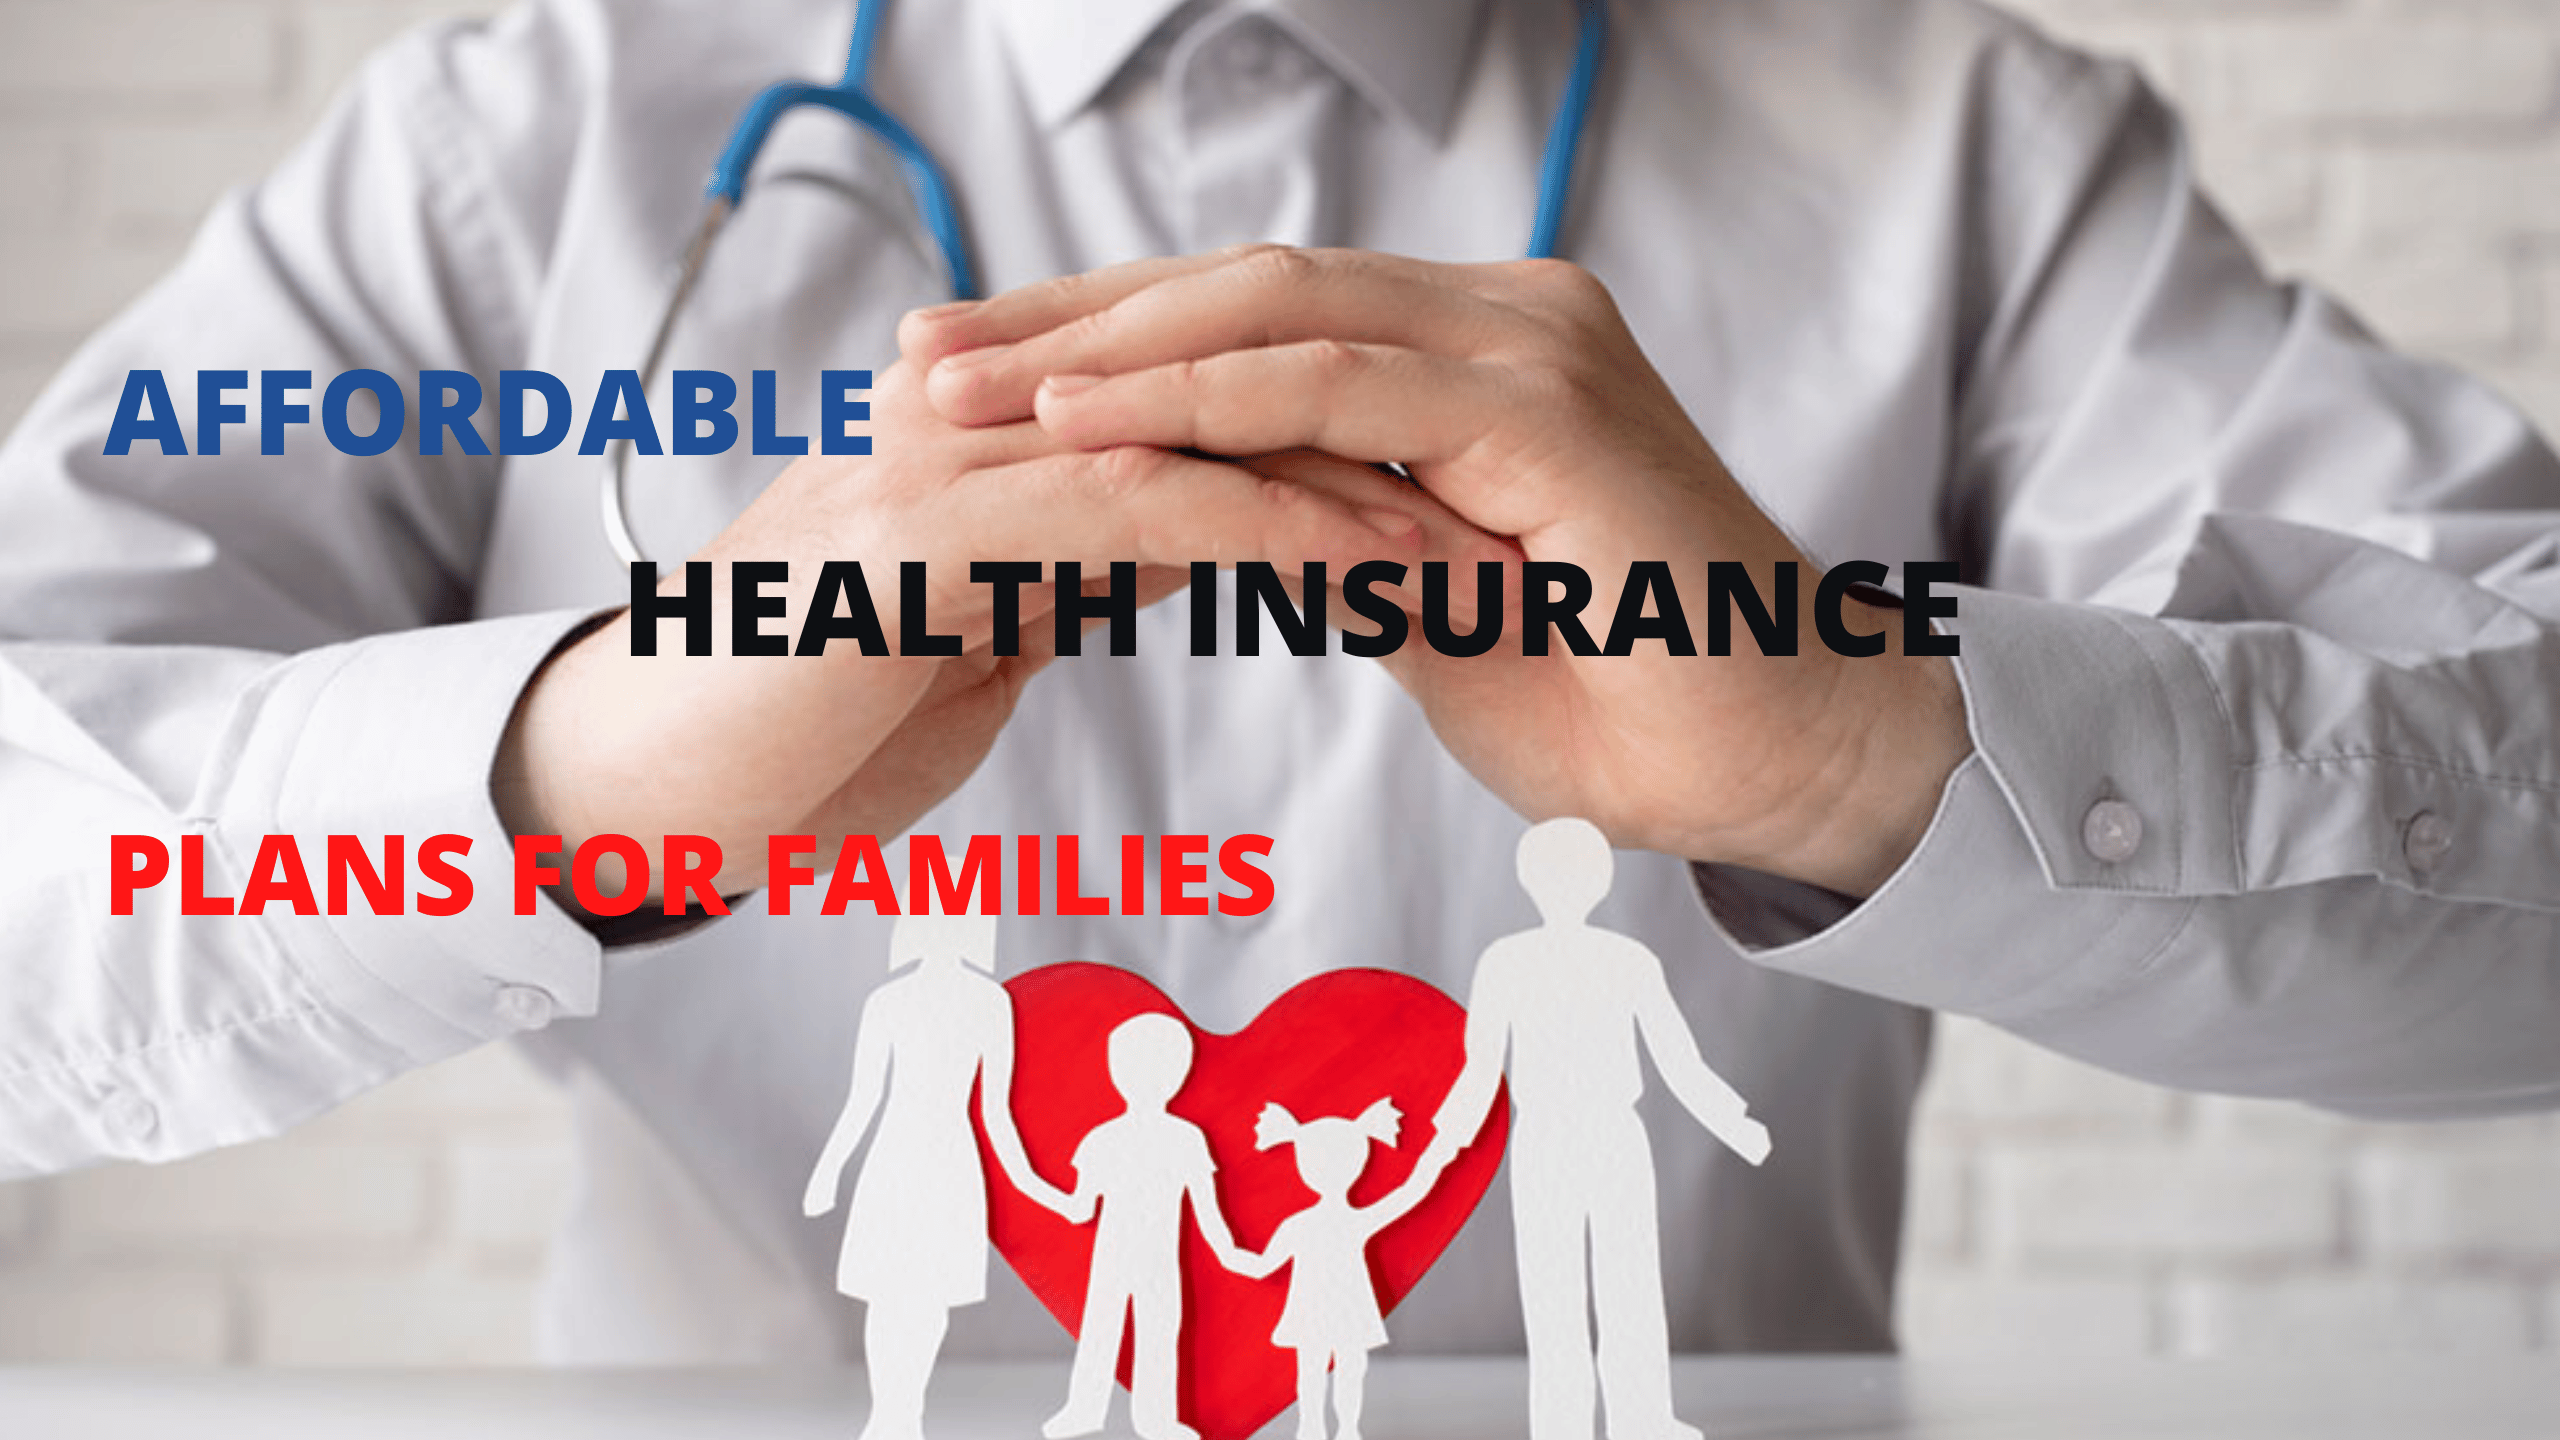 Affordable Health Insurance Plans for Families in the USA 2